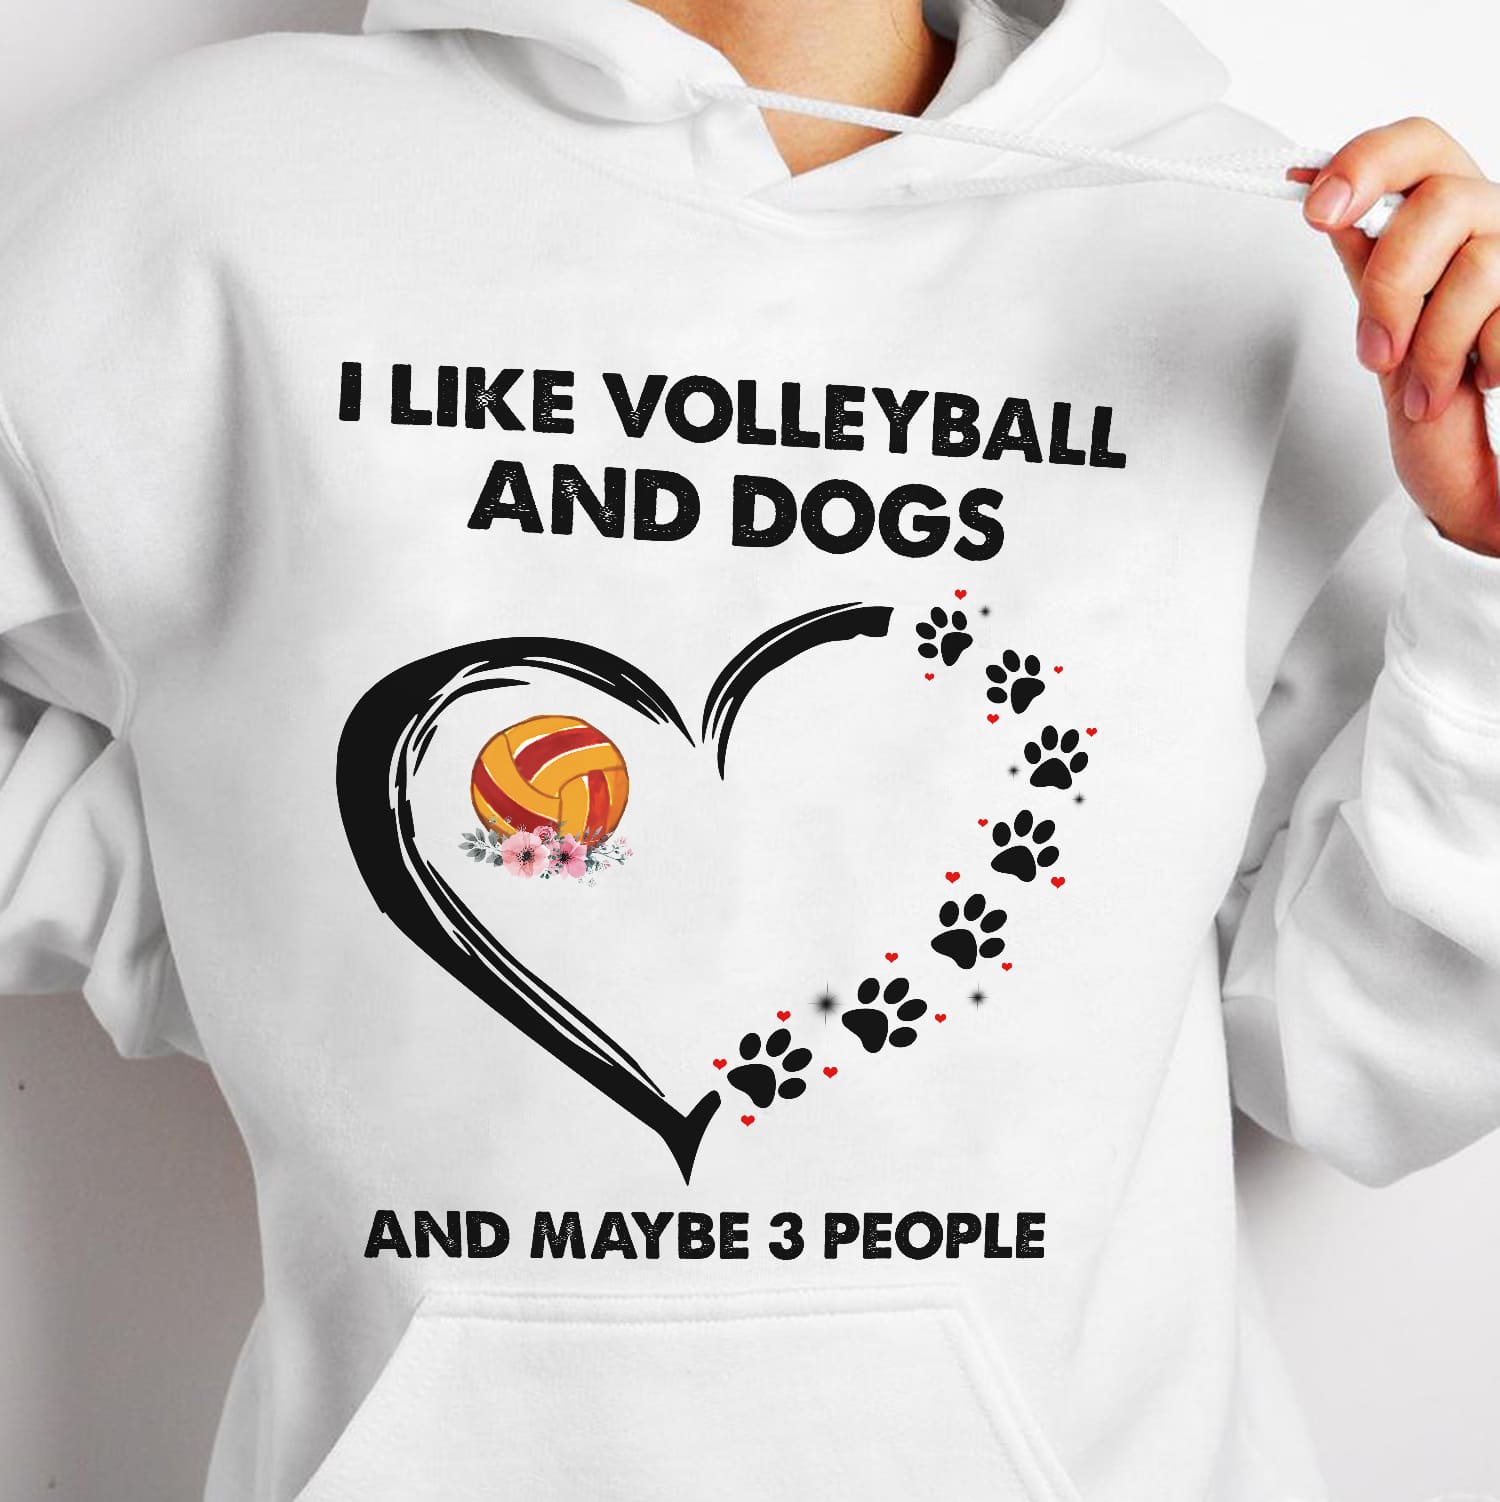 I like volleyball and dogs and maybe 3 people - Volleyball player T-shirt, dog footprint and volleyball